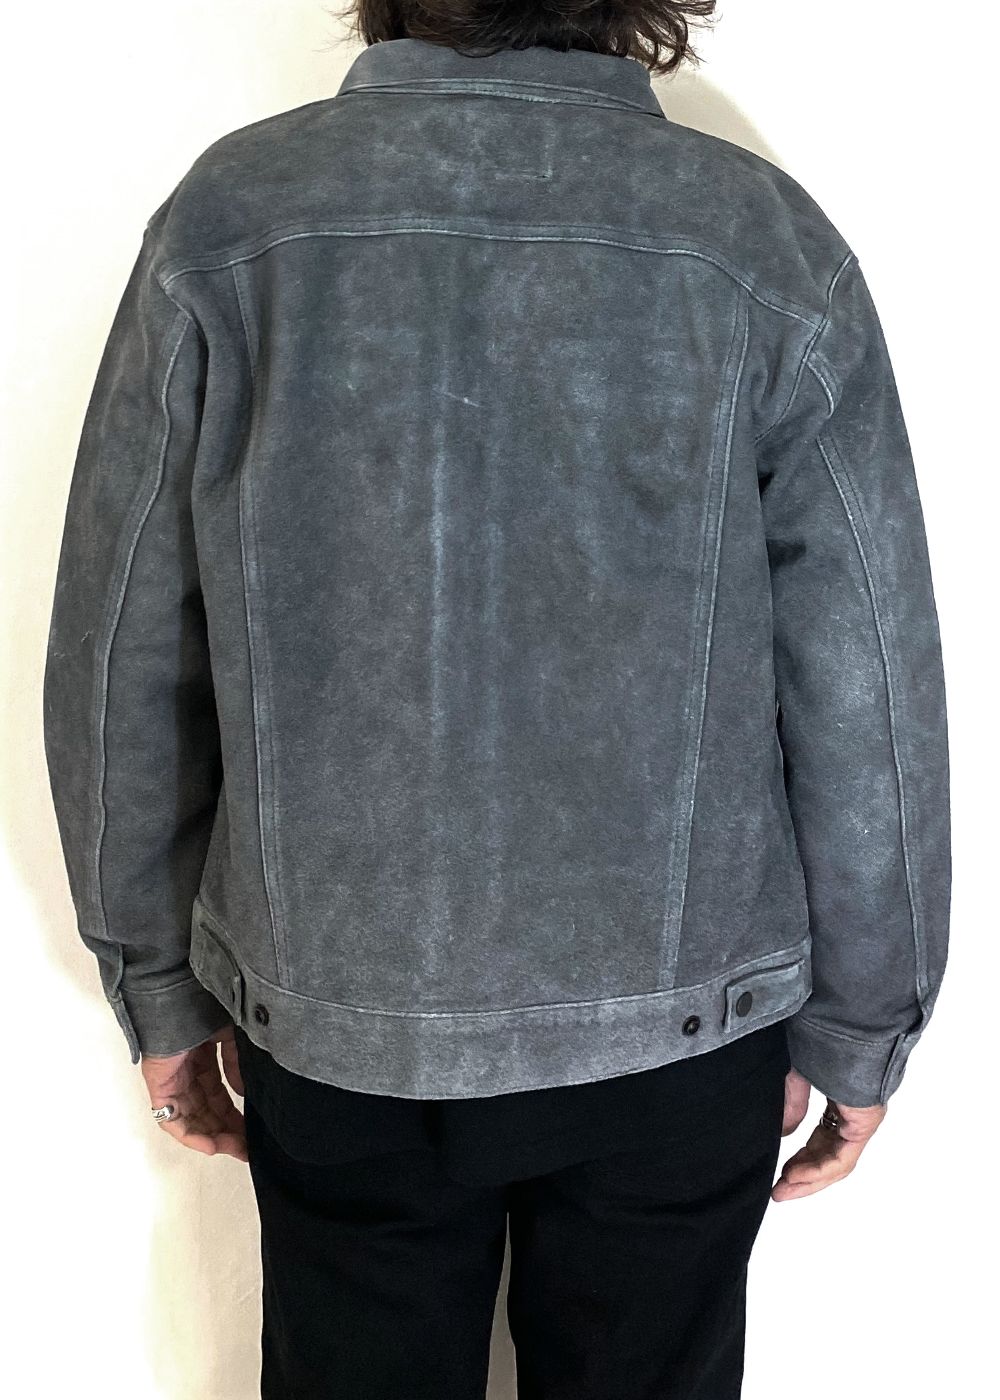 RATS - SUEDE LEATHER JACKET (GRAY) / トラッカータイプ スウェード 